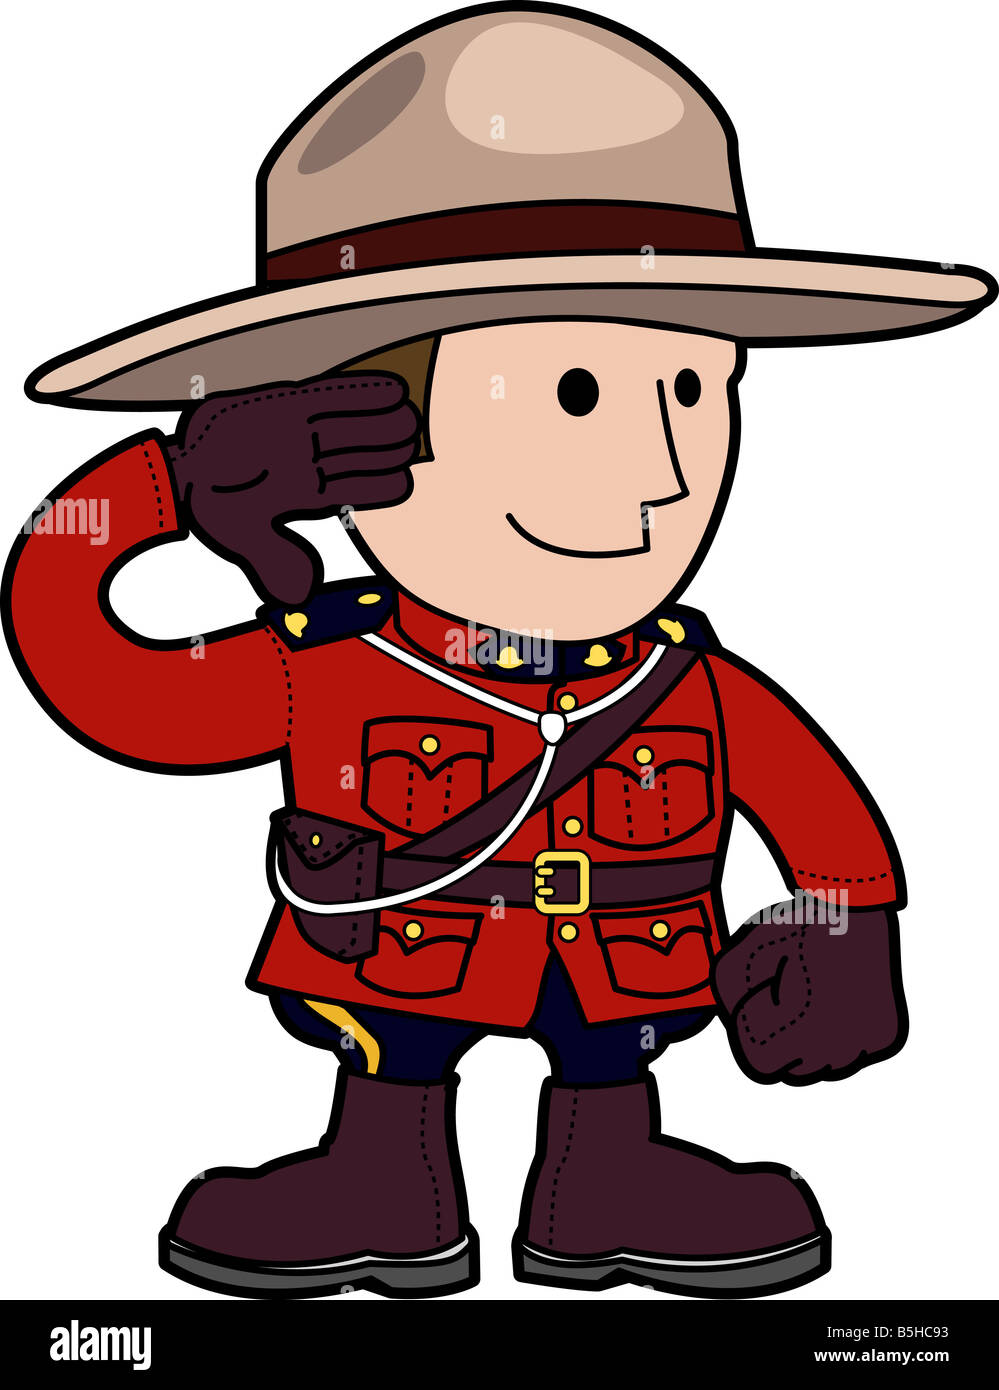 Illustration of mounty standing and saluting Stock Photo